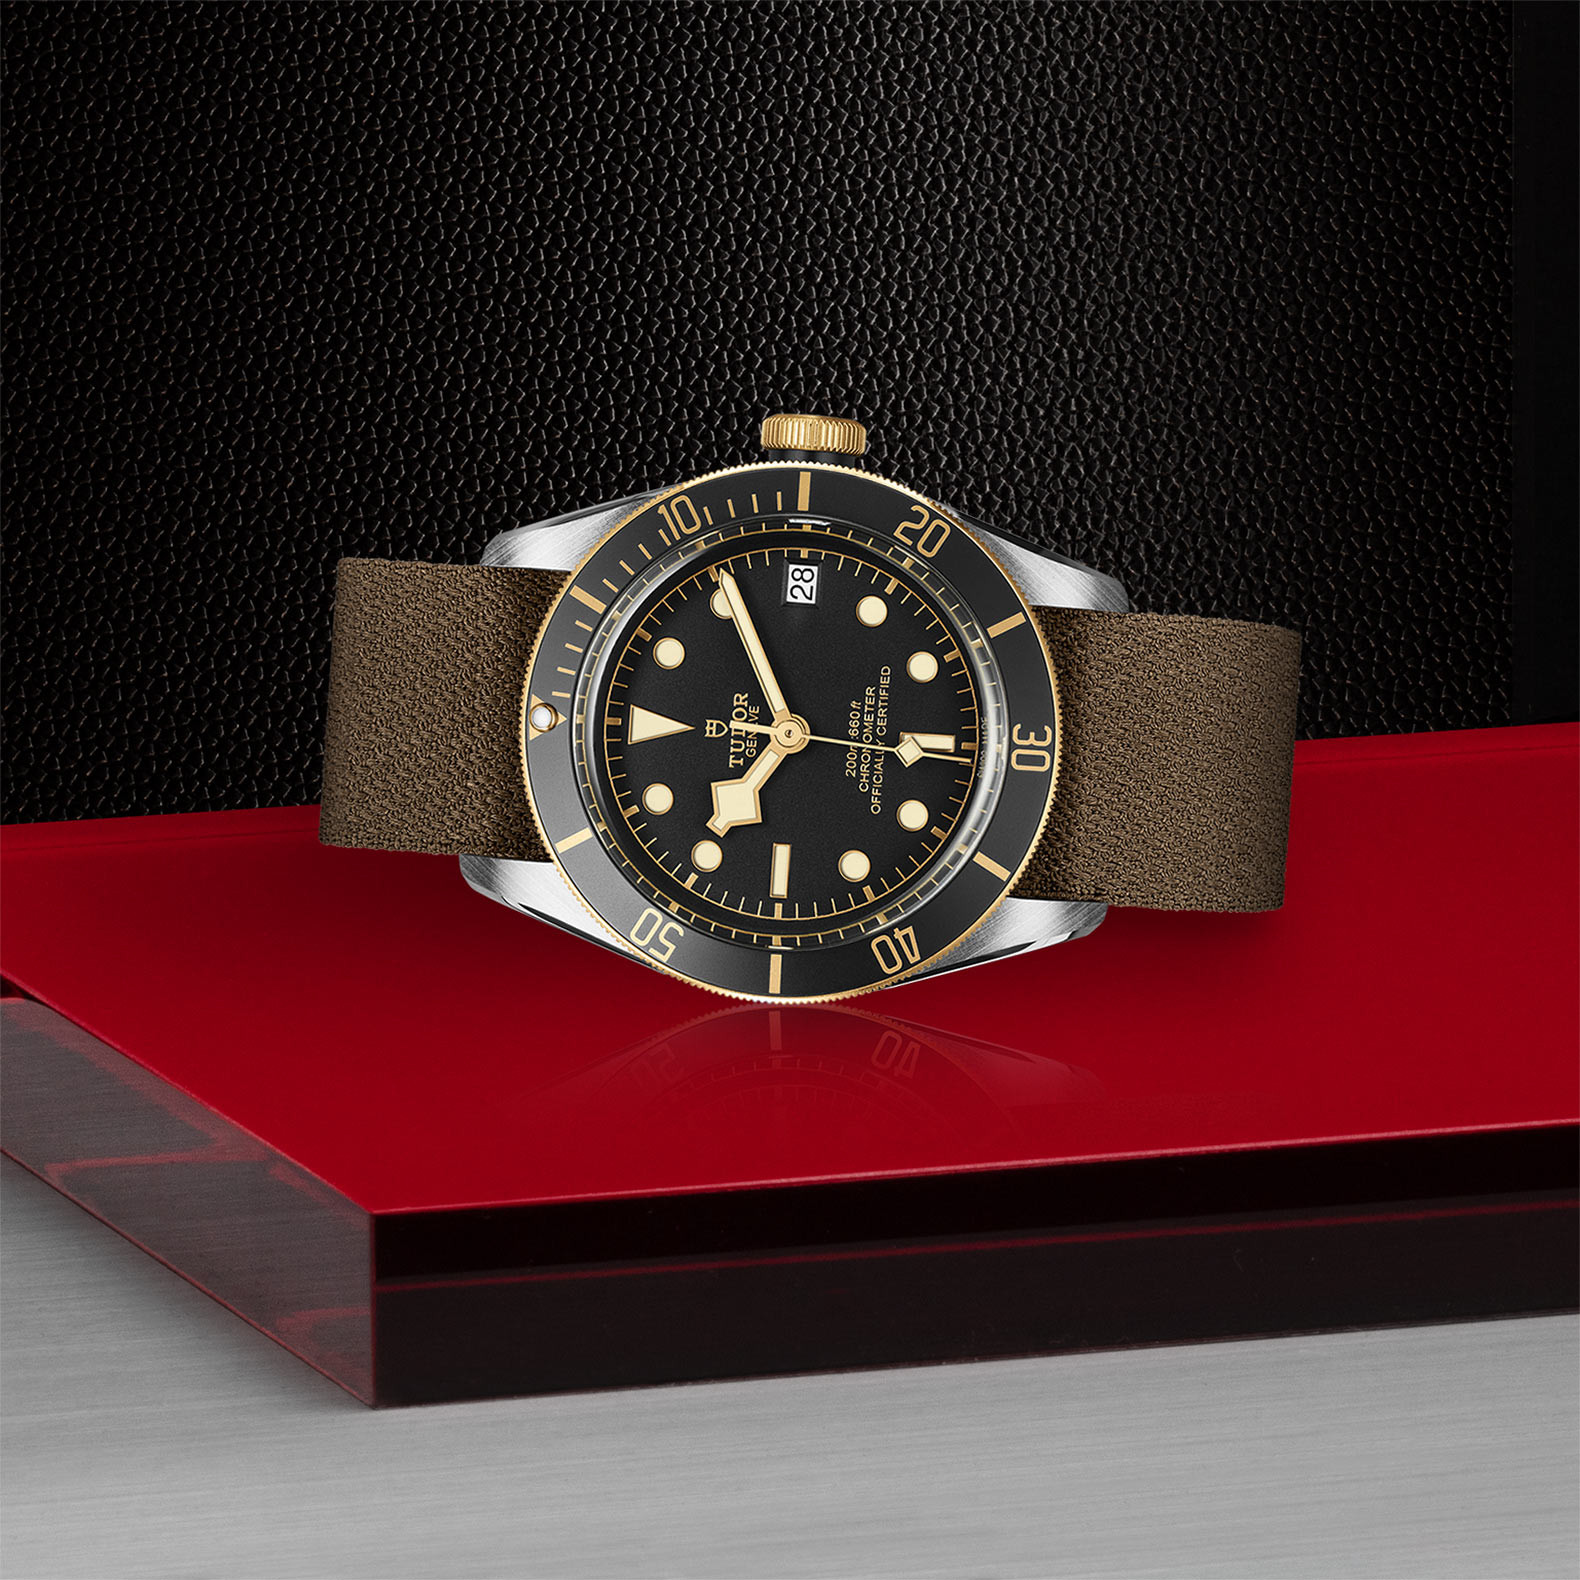 TUDOR Black Bay S&G Watch in Store Laying Down